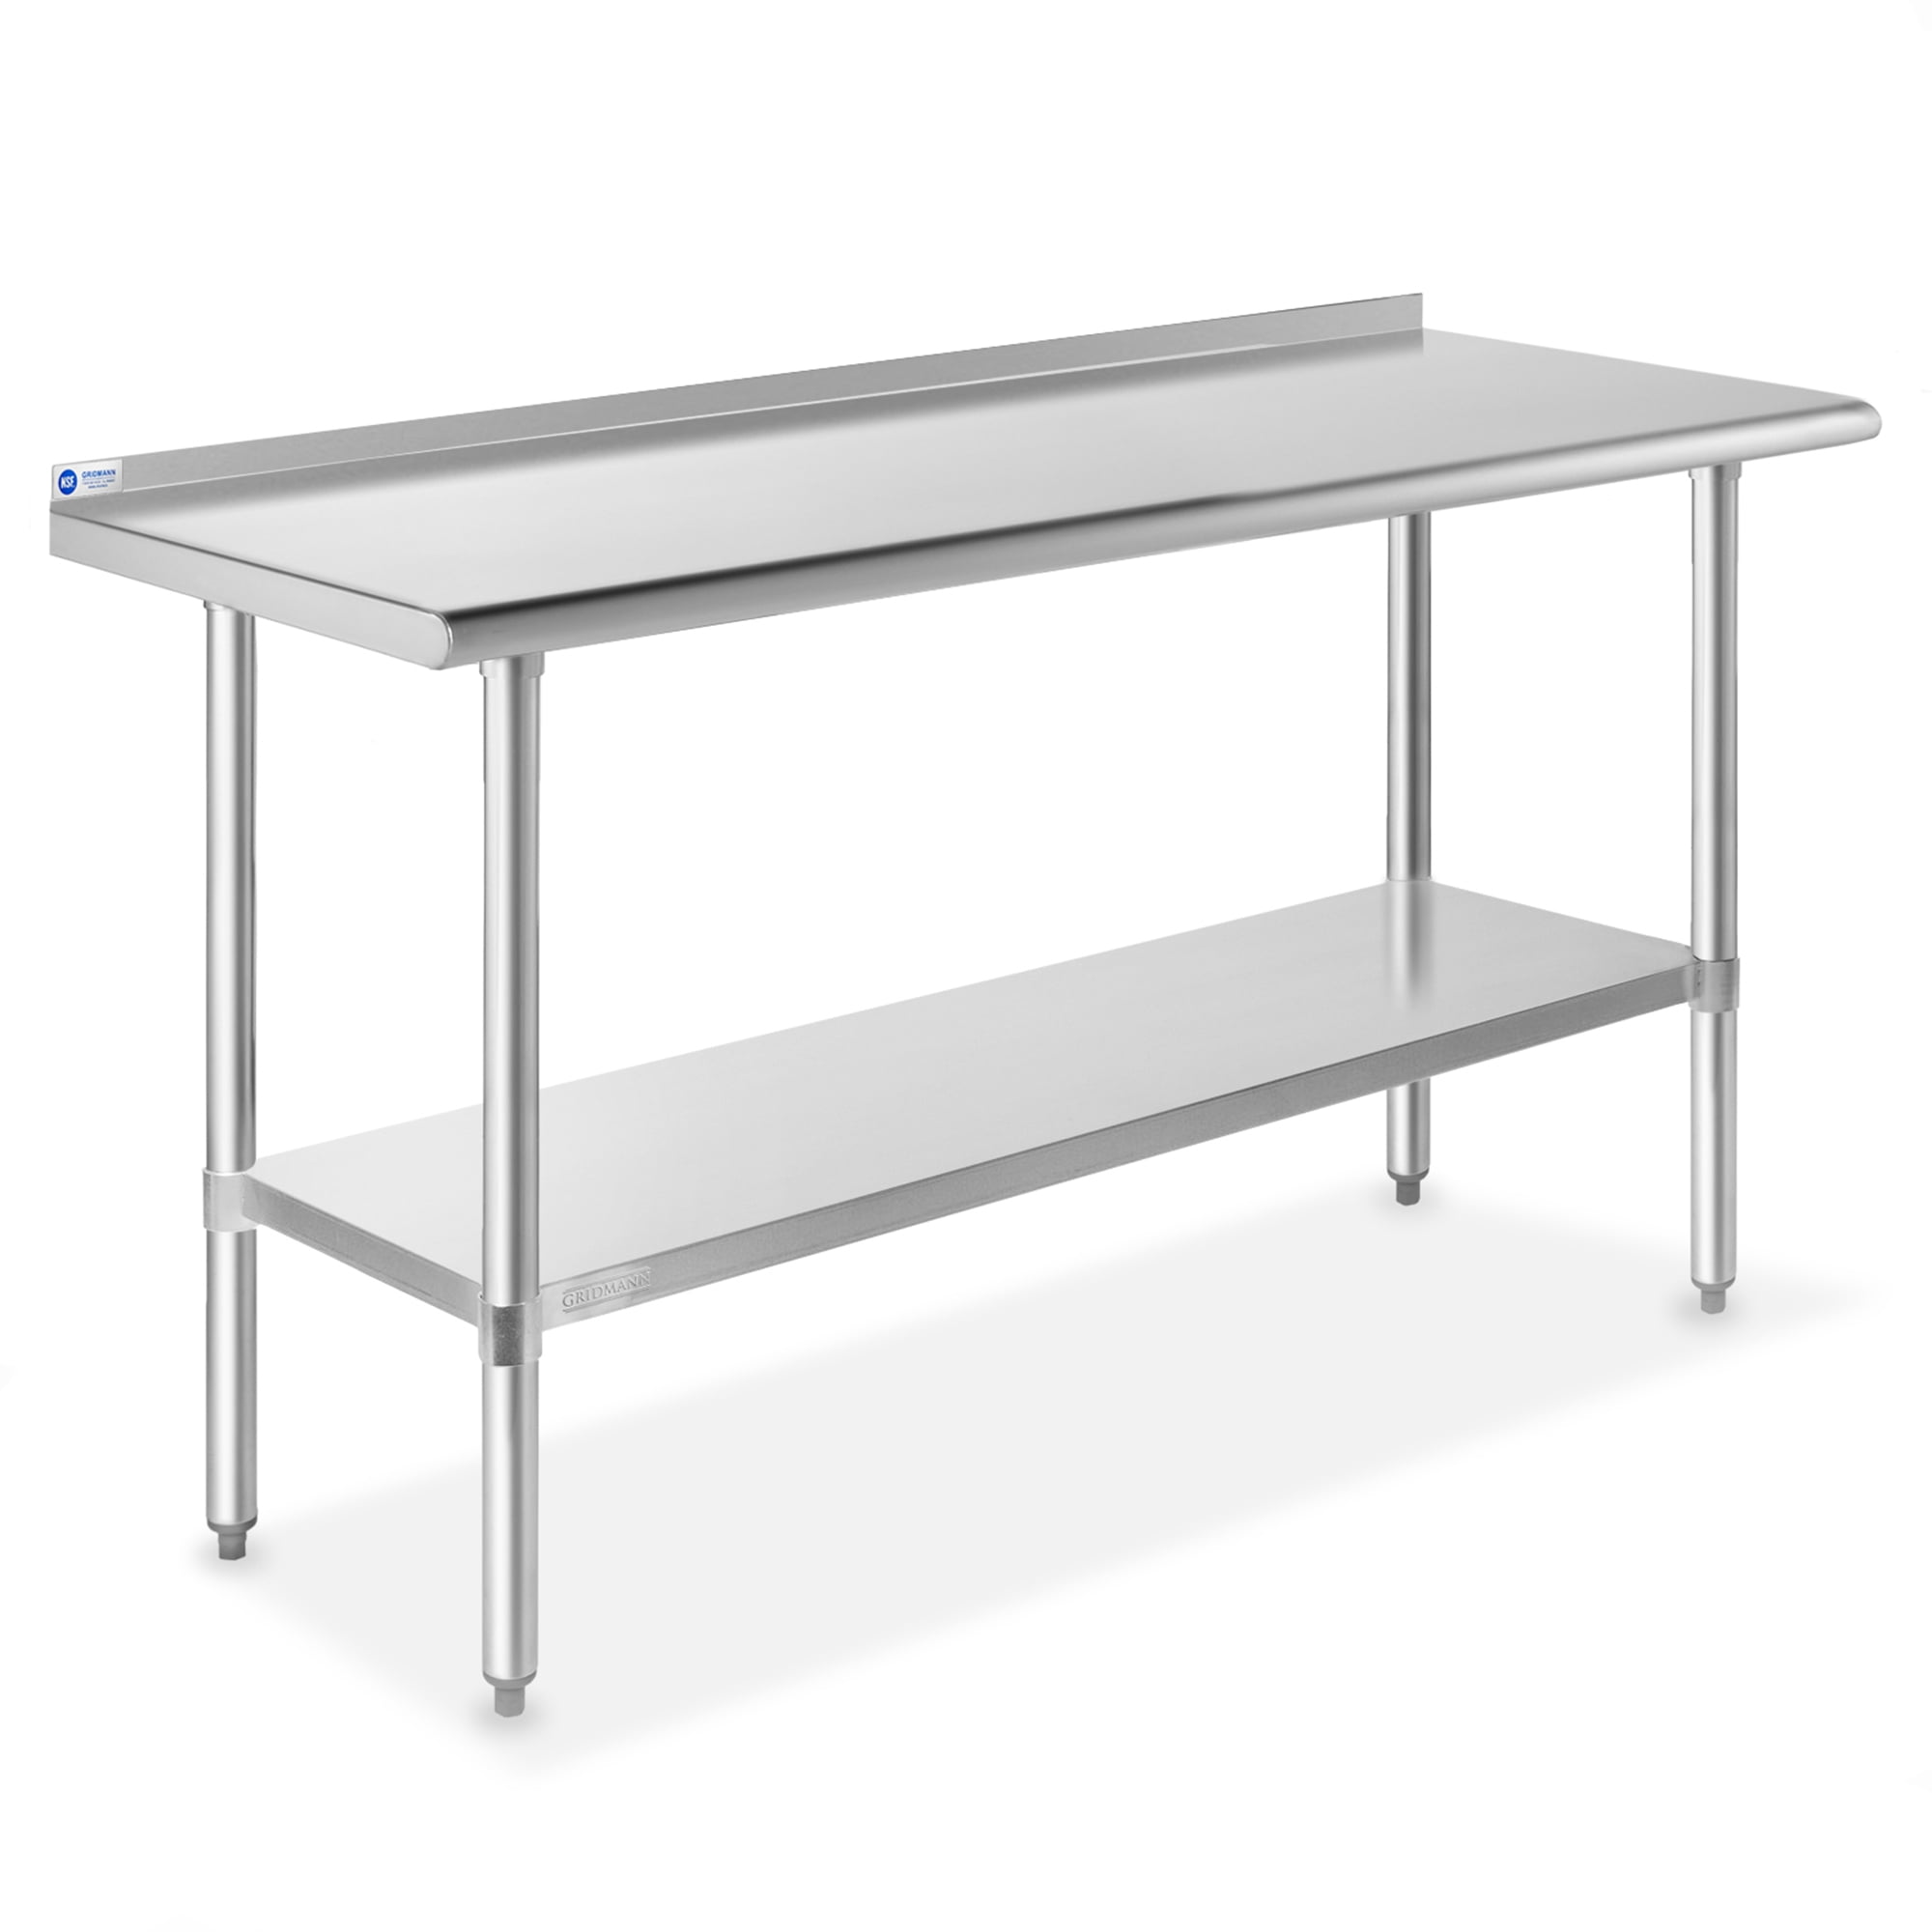 24x60 Inch WMAOT 24 x 60 Inch Stainless Steel Table Commercial Grade NSF Kitchen Work Table 